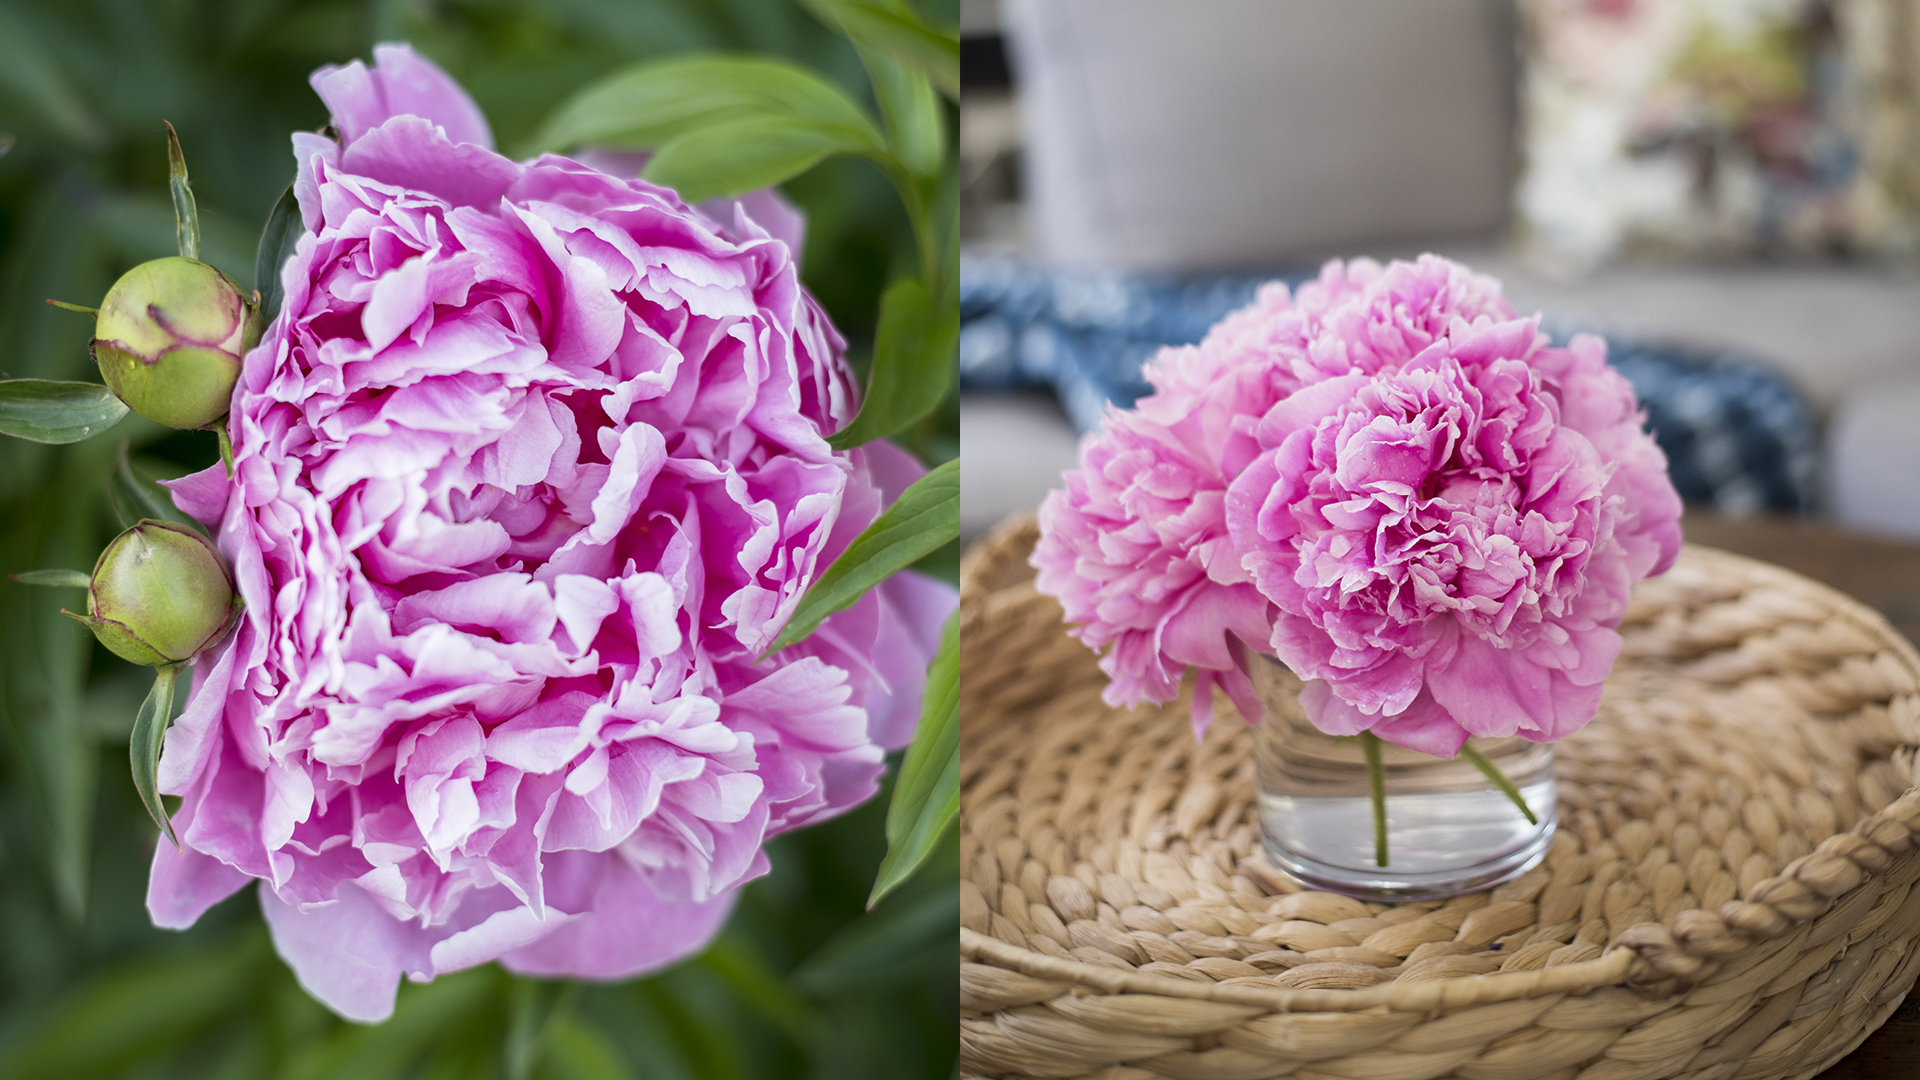 PEONIES 101 | How to get ants off peonies, how to make them bloom later & more!